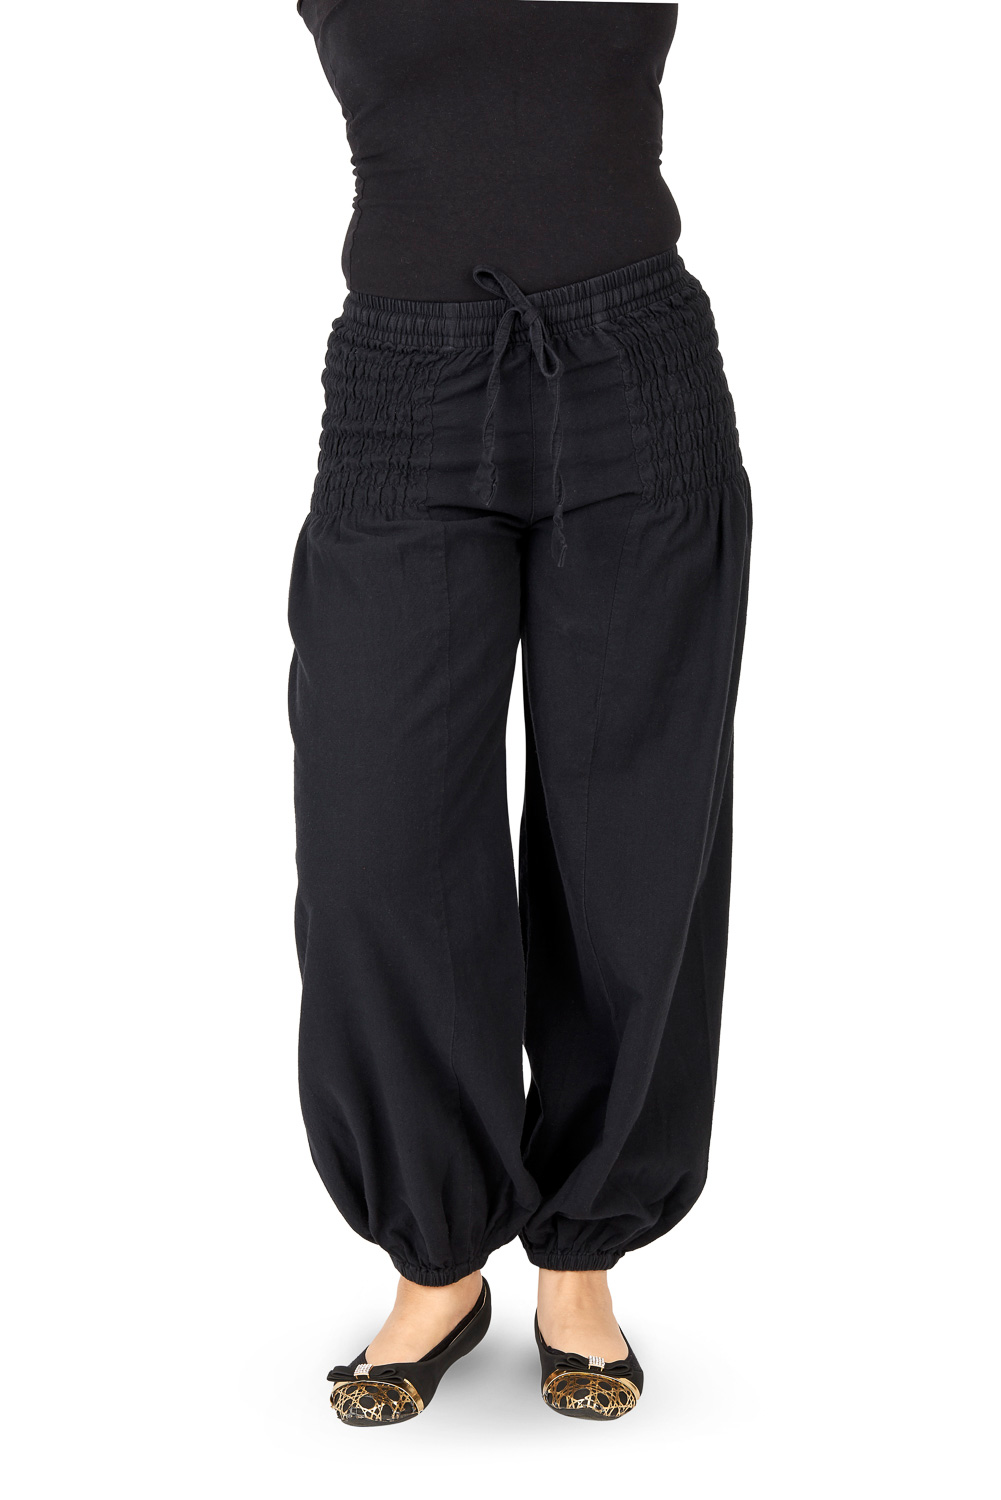 Wicked Dragon Clothing - Unisex long baggy cotton trousers